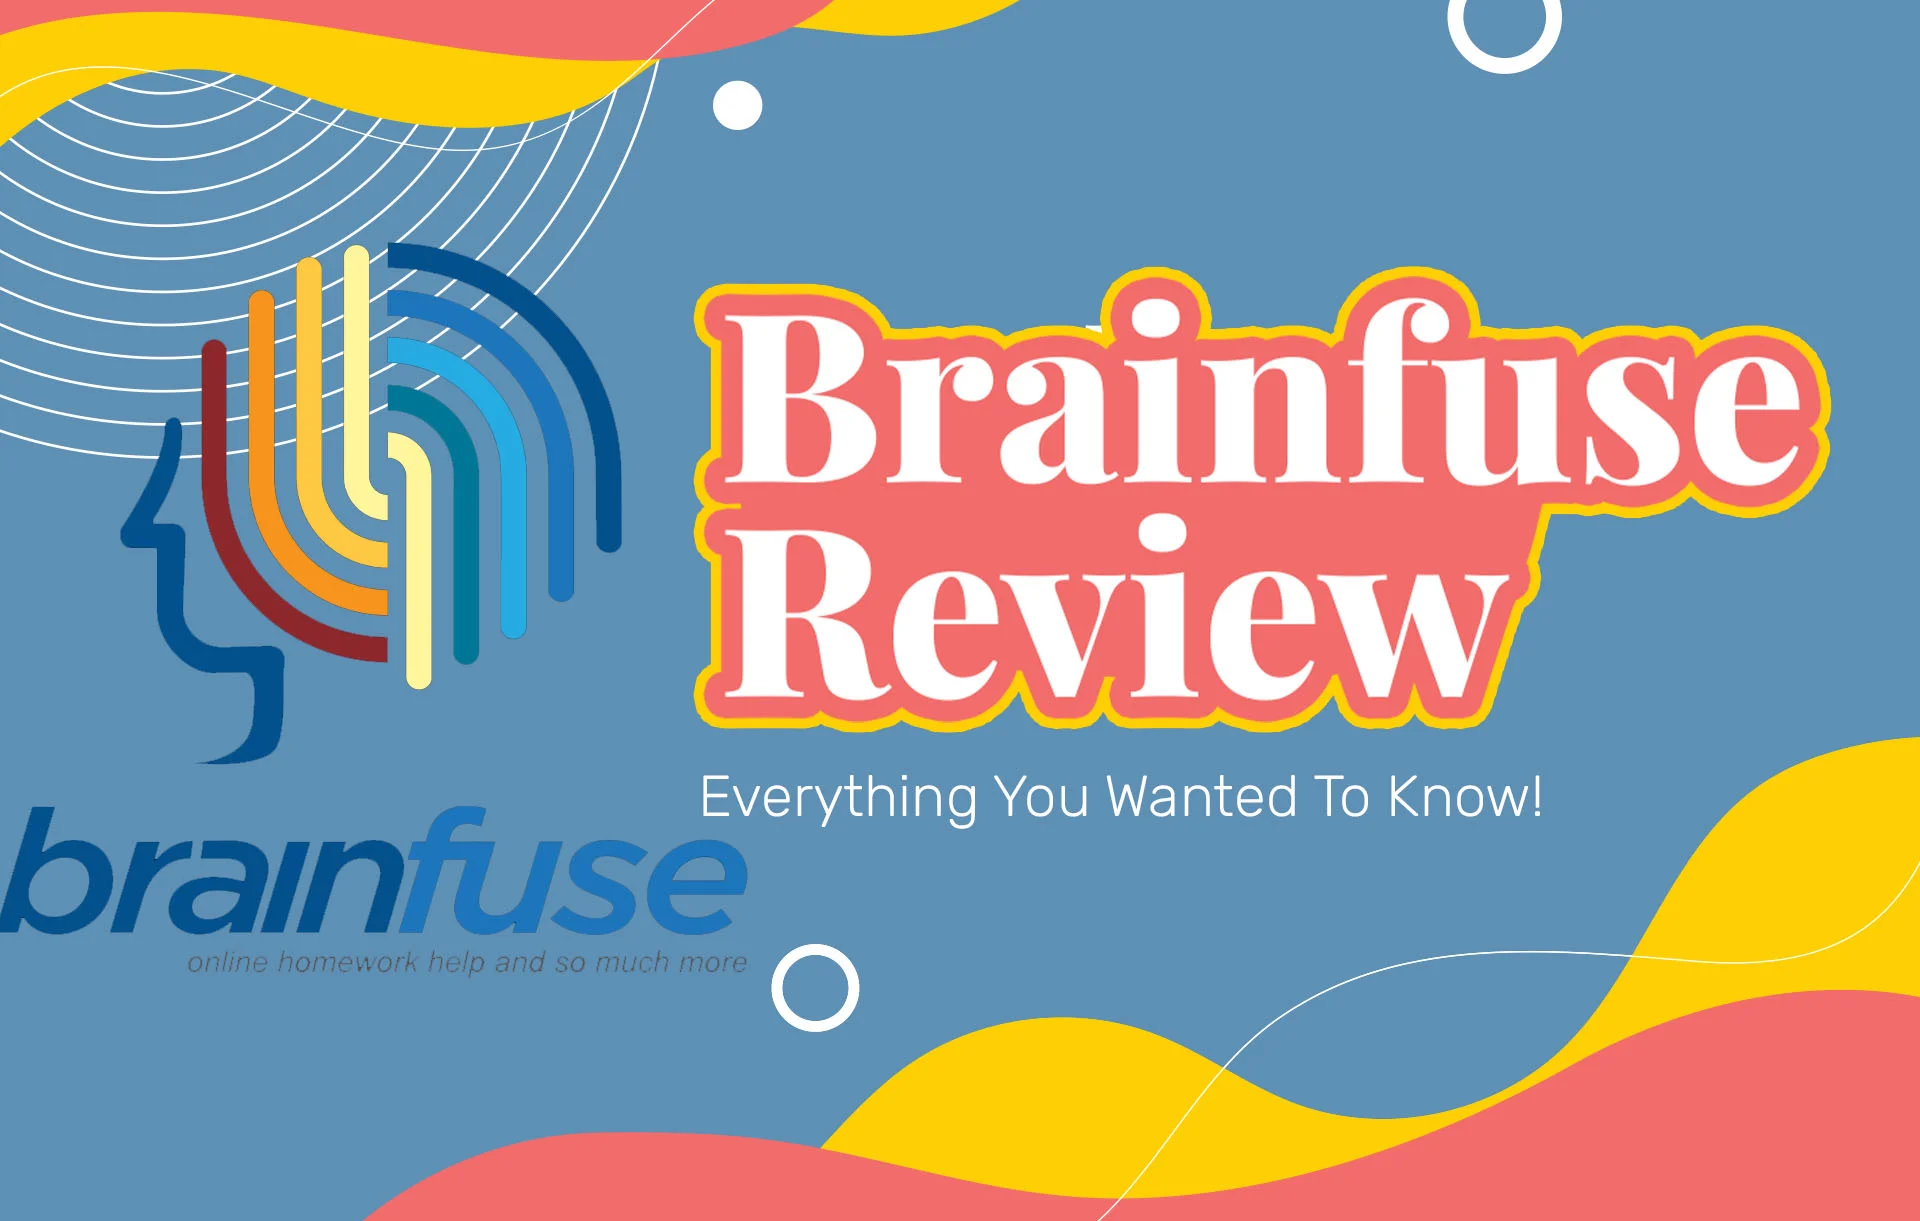 Brainfuse Reviews: Best Work From Home Company?